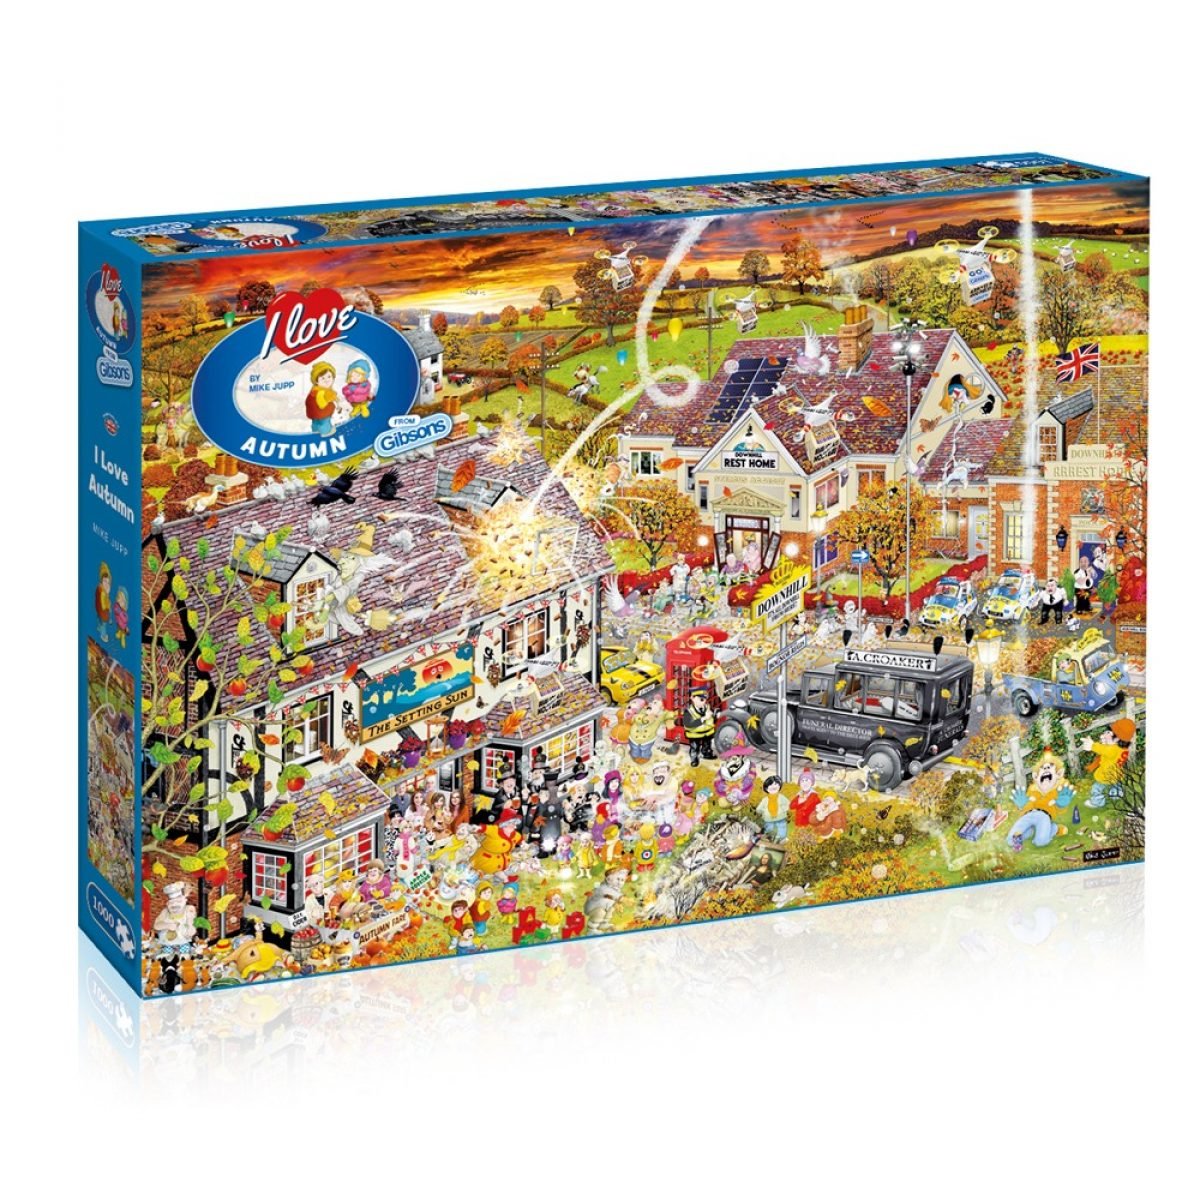 COMPLETE Mike Jupp 1000 piece jigsaw puzzles from Gibsons 